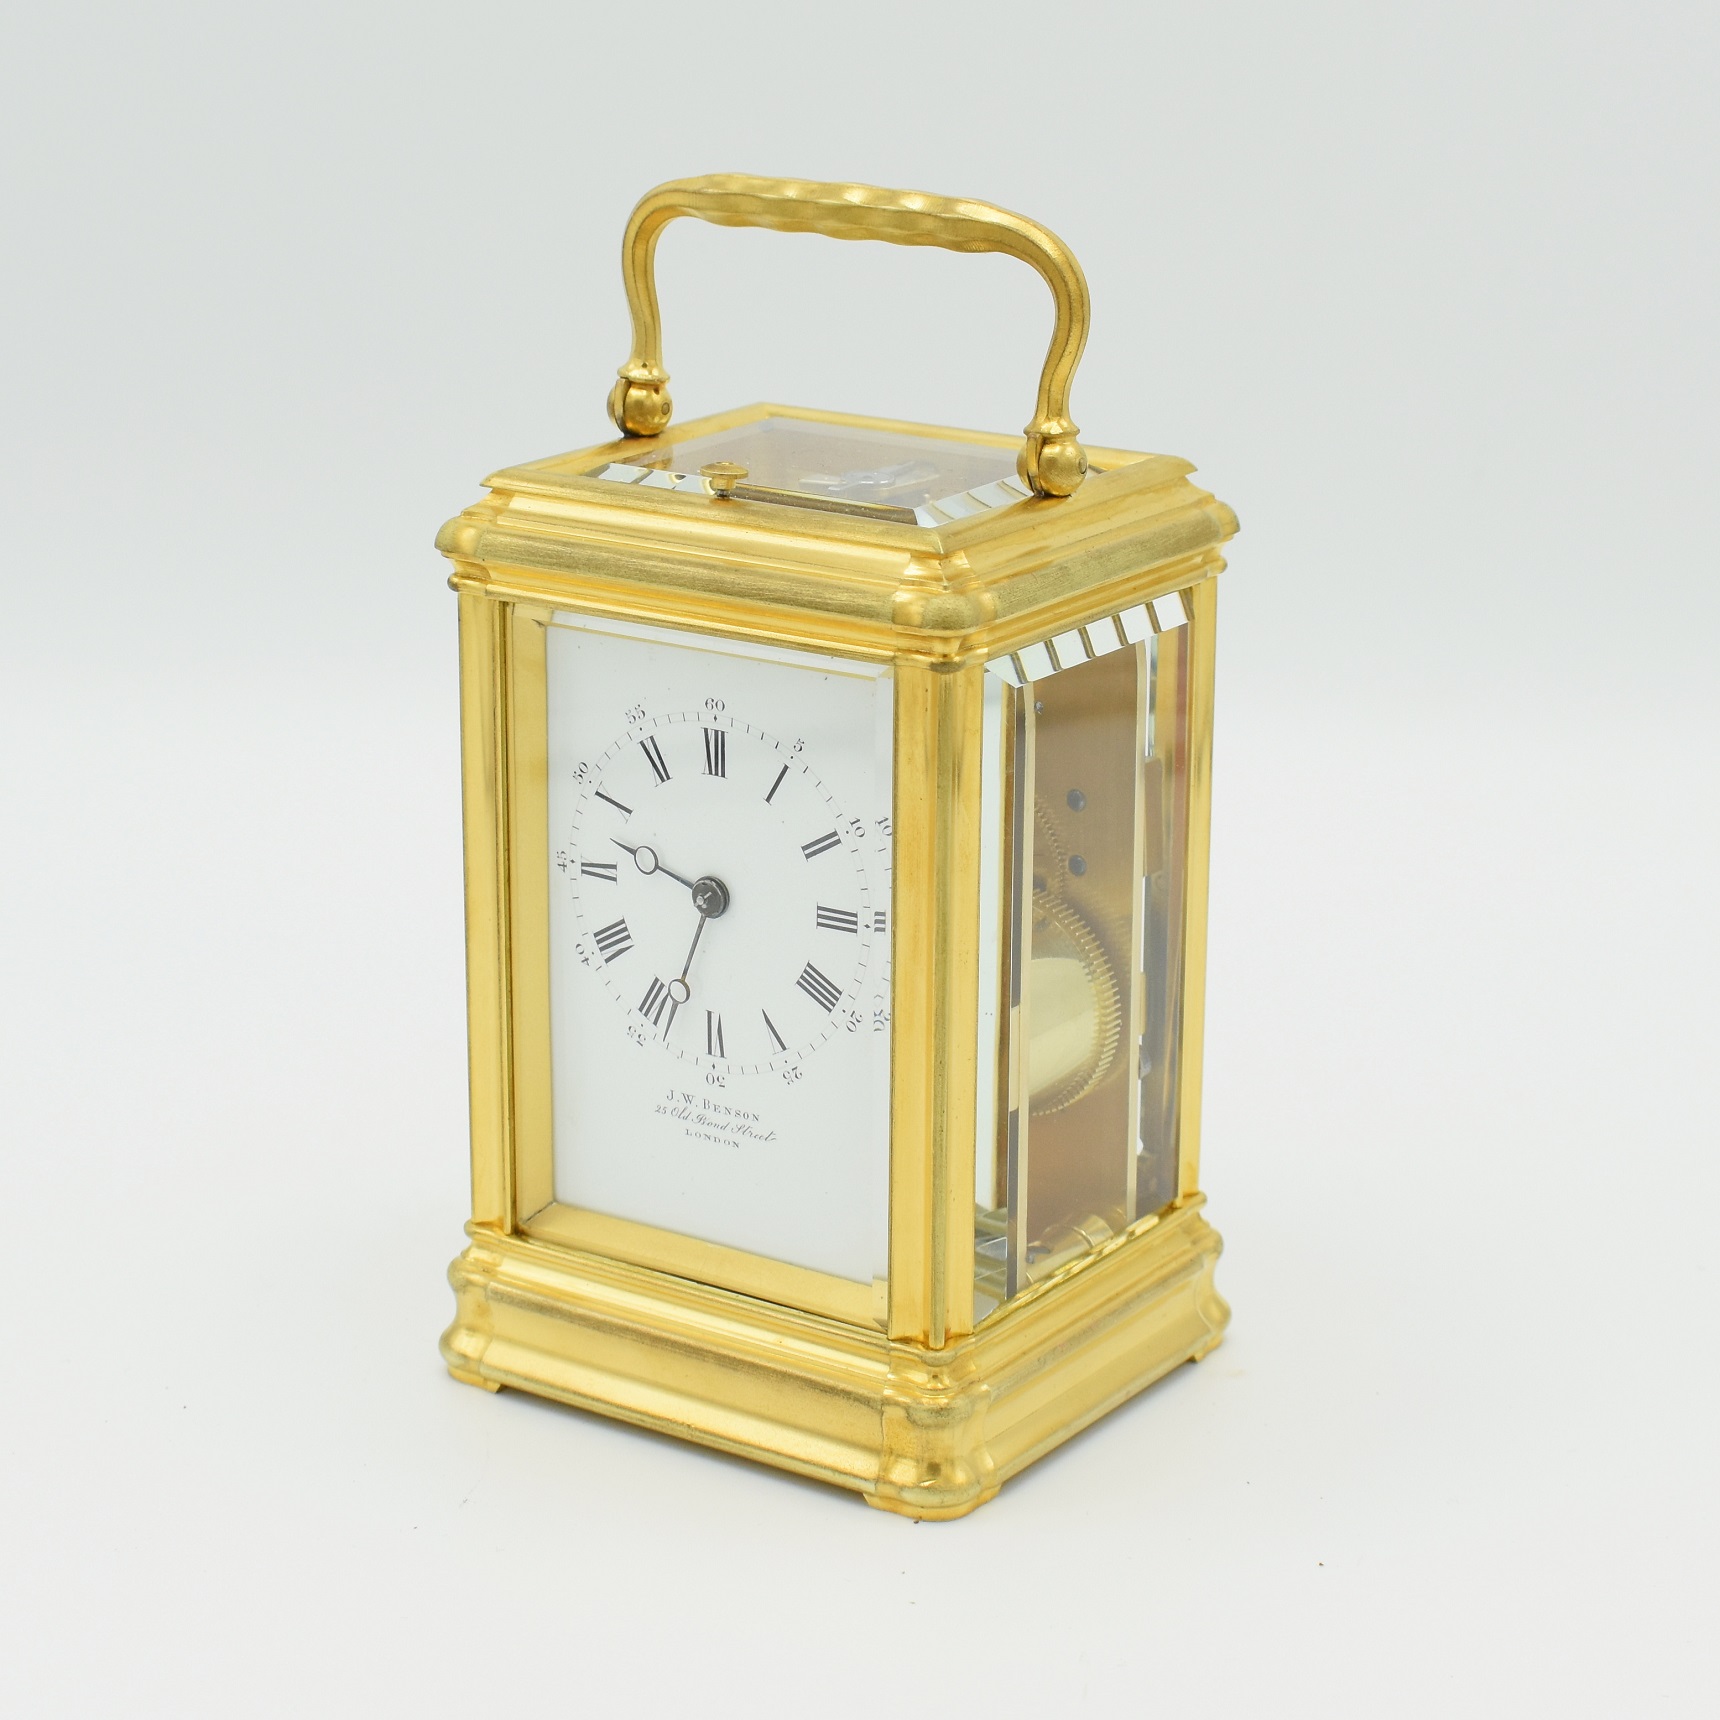 Petite Sonnerie – Carriage Clock – It's About Time